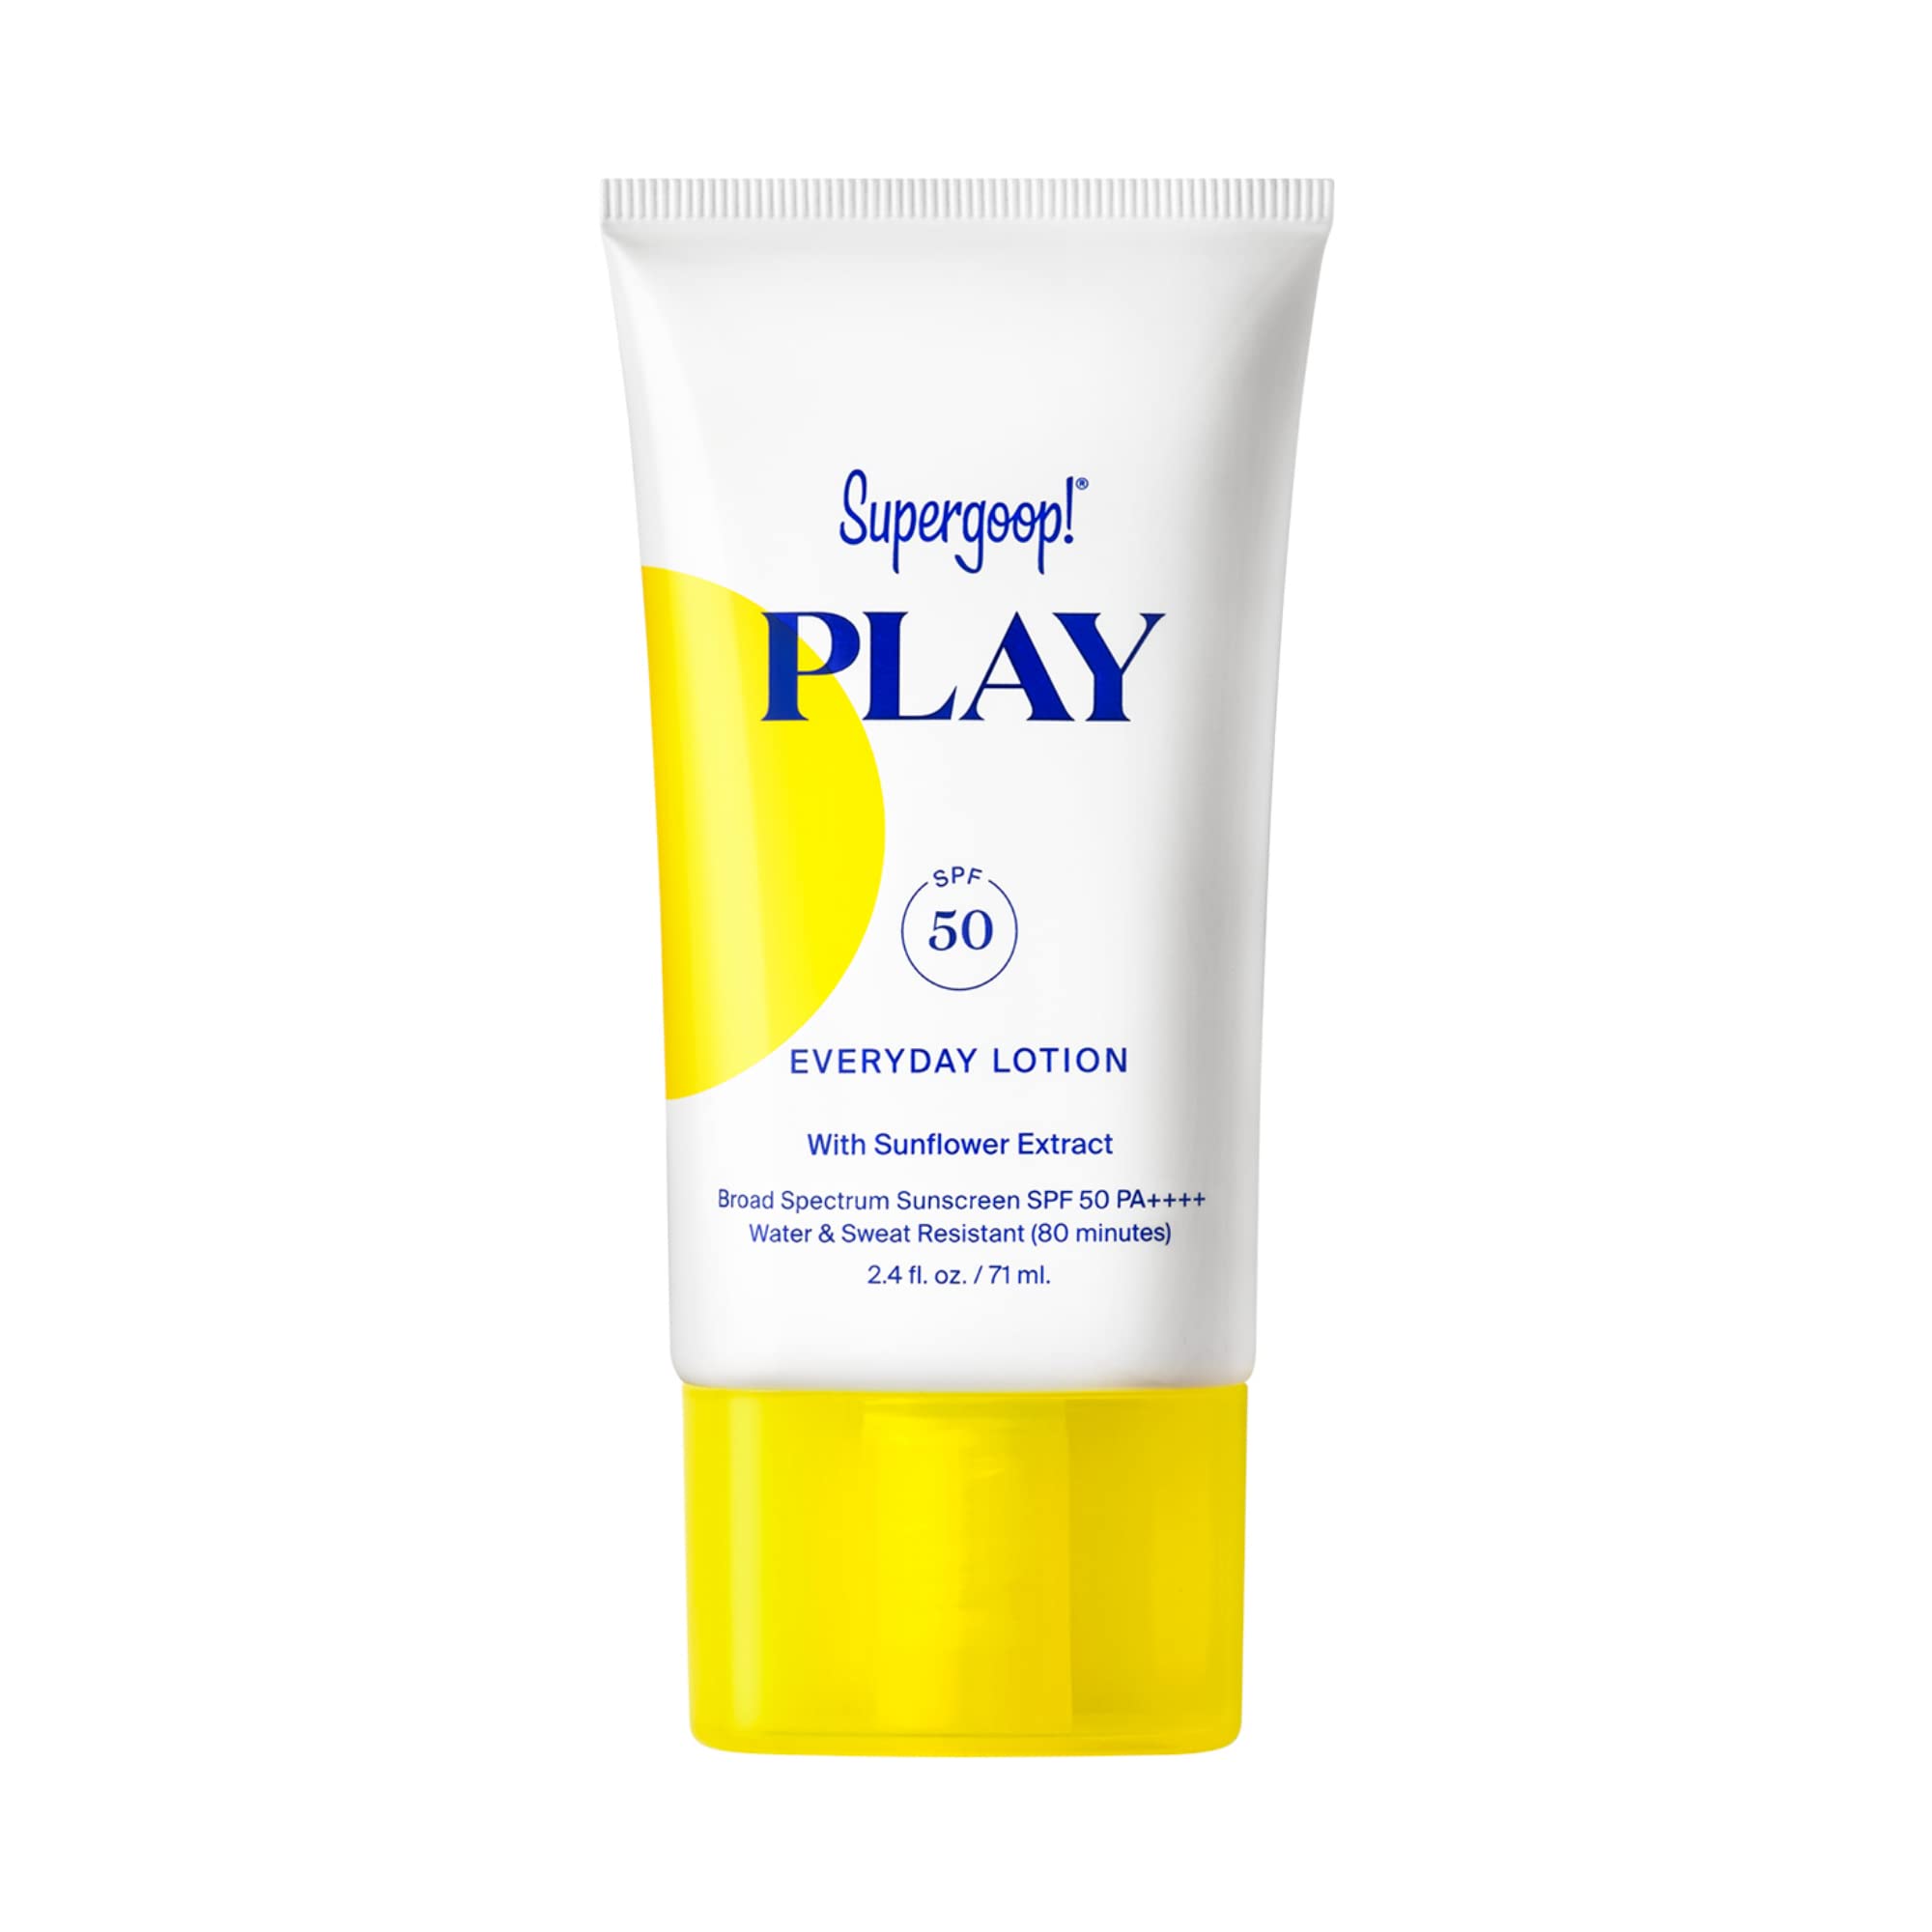 Supergoop! PLAY Everyday Lotion - SPF 50 PA++++ Reef-Friendly, Broad Spectrum, Body & Face Sunscreen for Sensitive Skin - Water & Sweat Resistant - Clean Ingredients - Great for Active Days